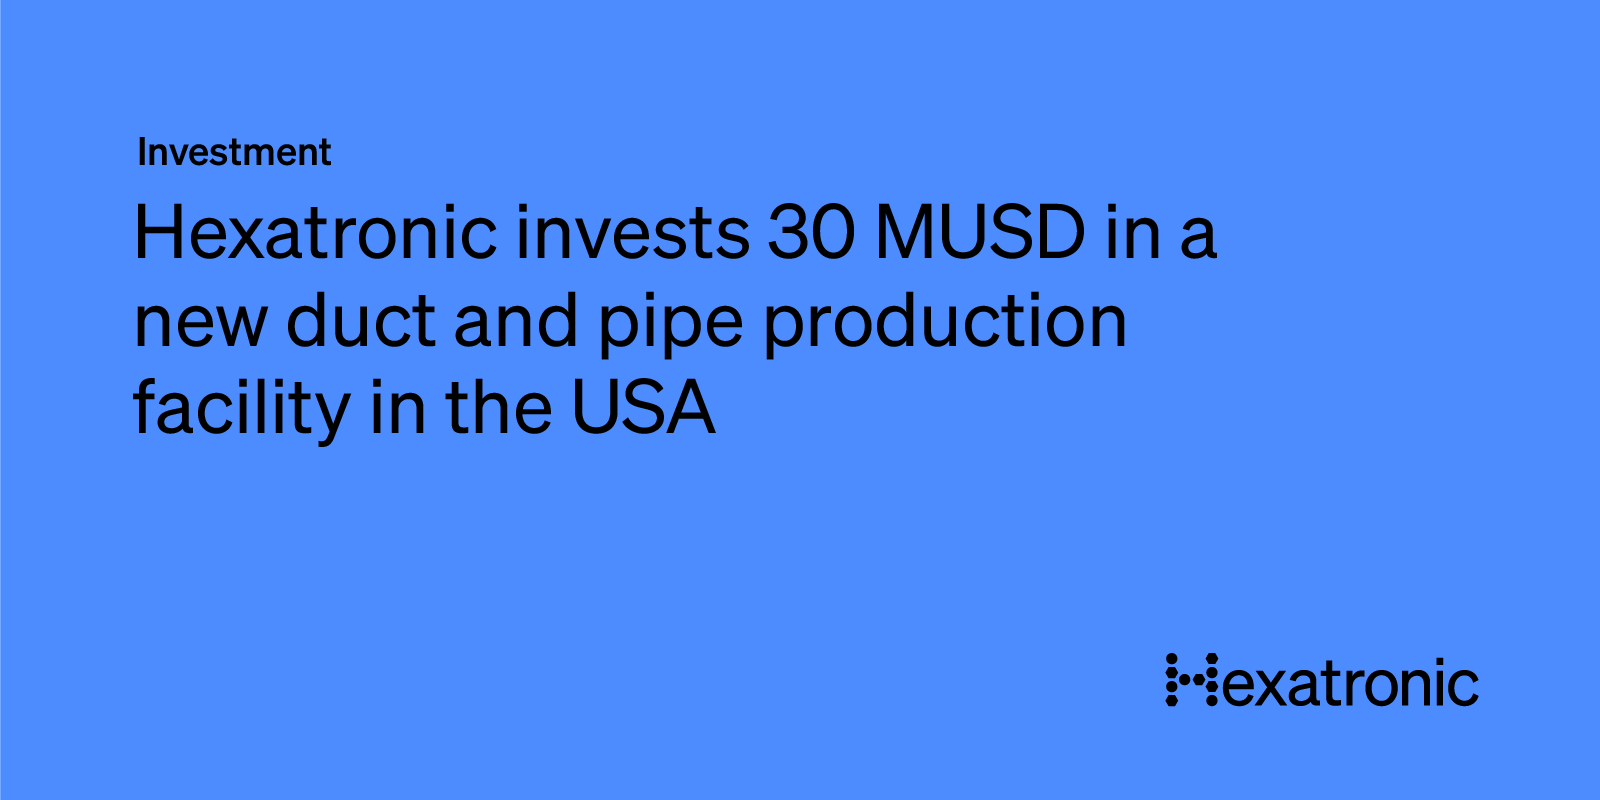 Hexatronic invests 30 MUSD in a new duct and pipe production facility in the Western USA